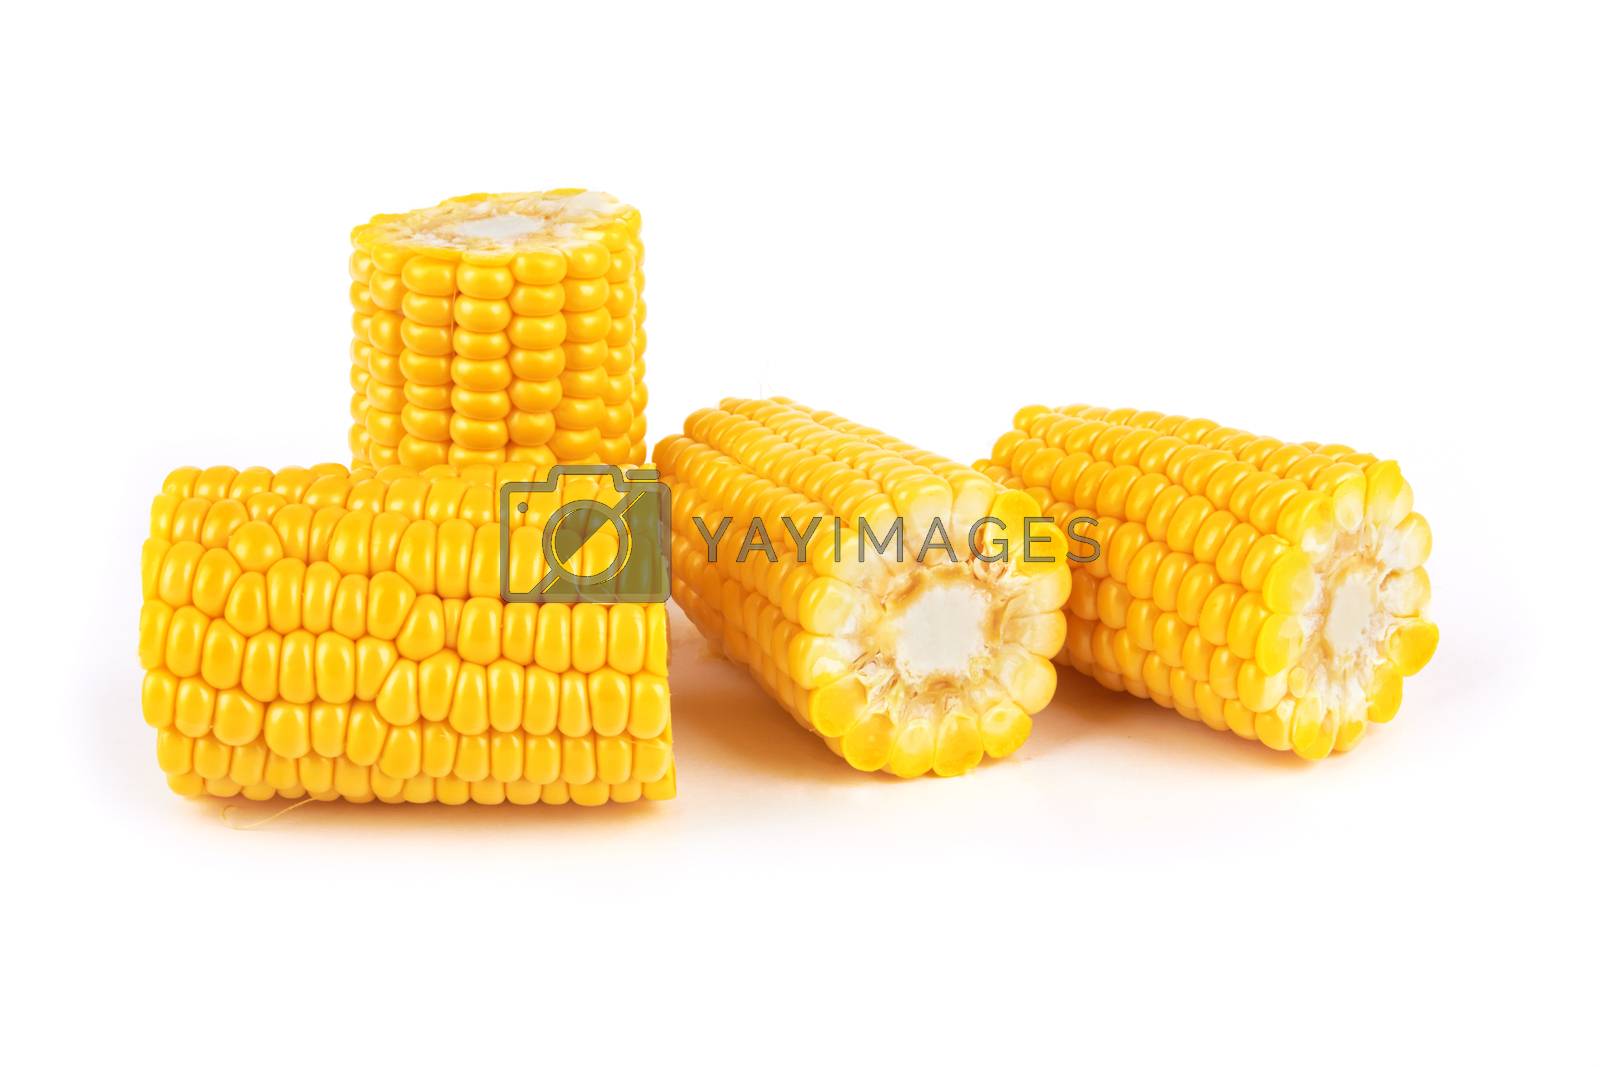 Royalty free image of corn by pioneer111